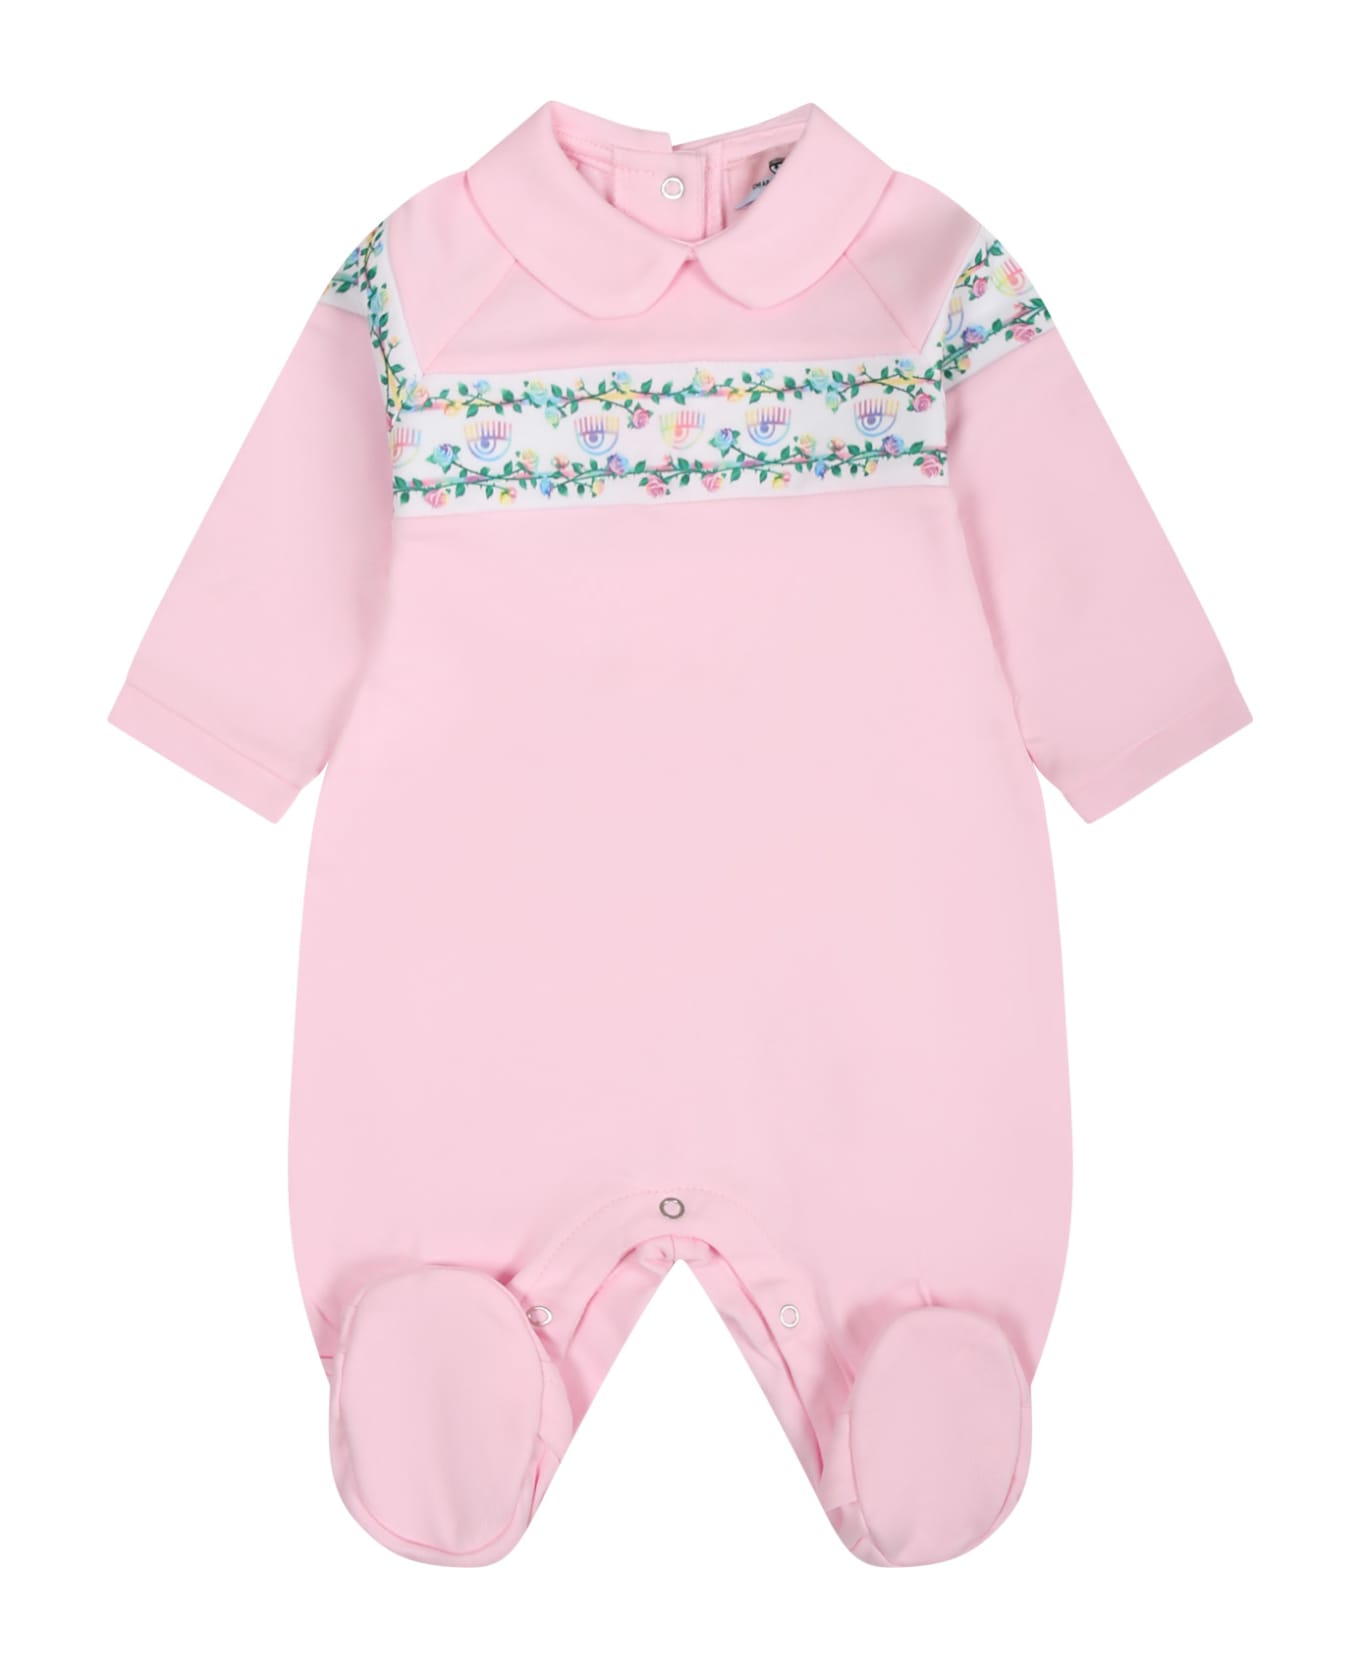 Chiara Ferragni Pink Playsuit For Baby Girl With Flirting Eyes And Multicolor Roses - Pink